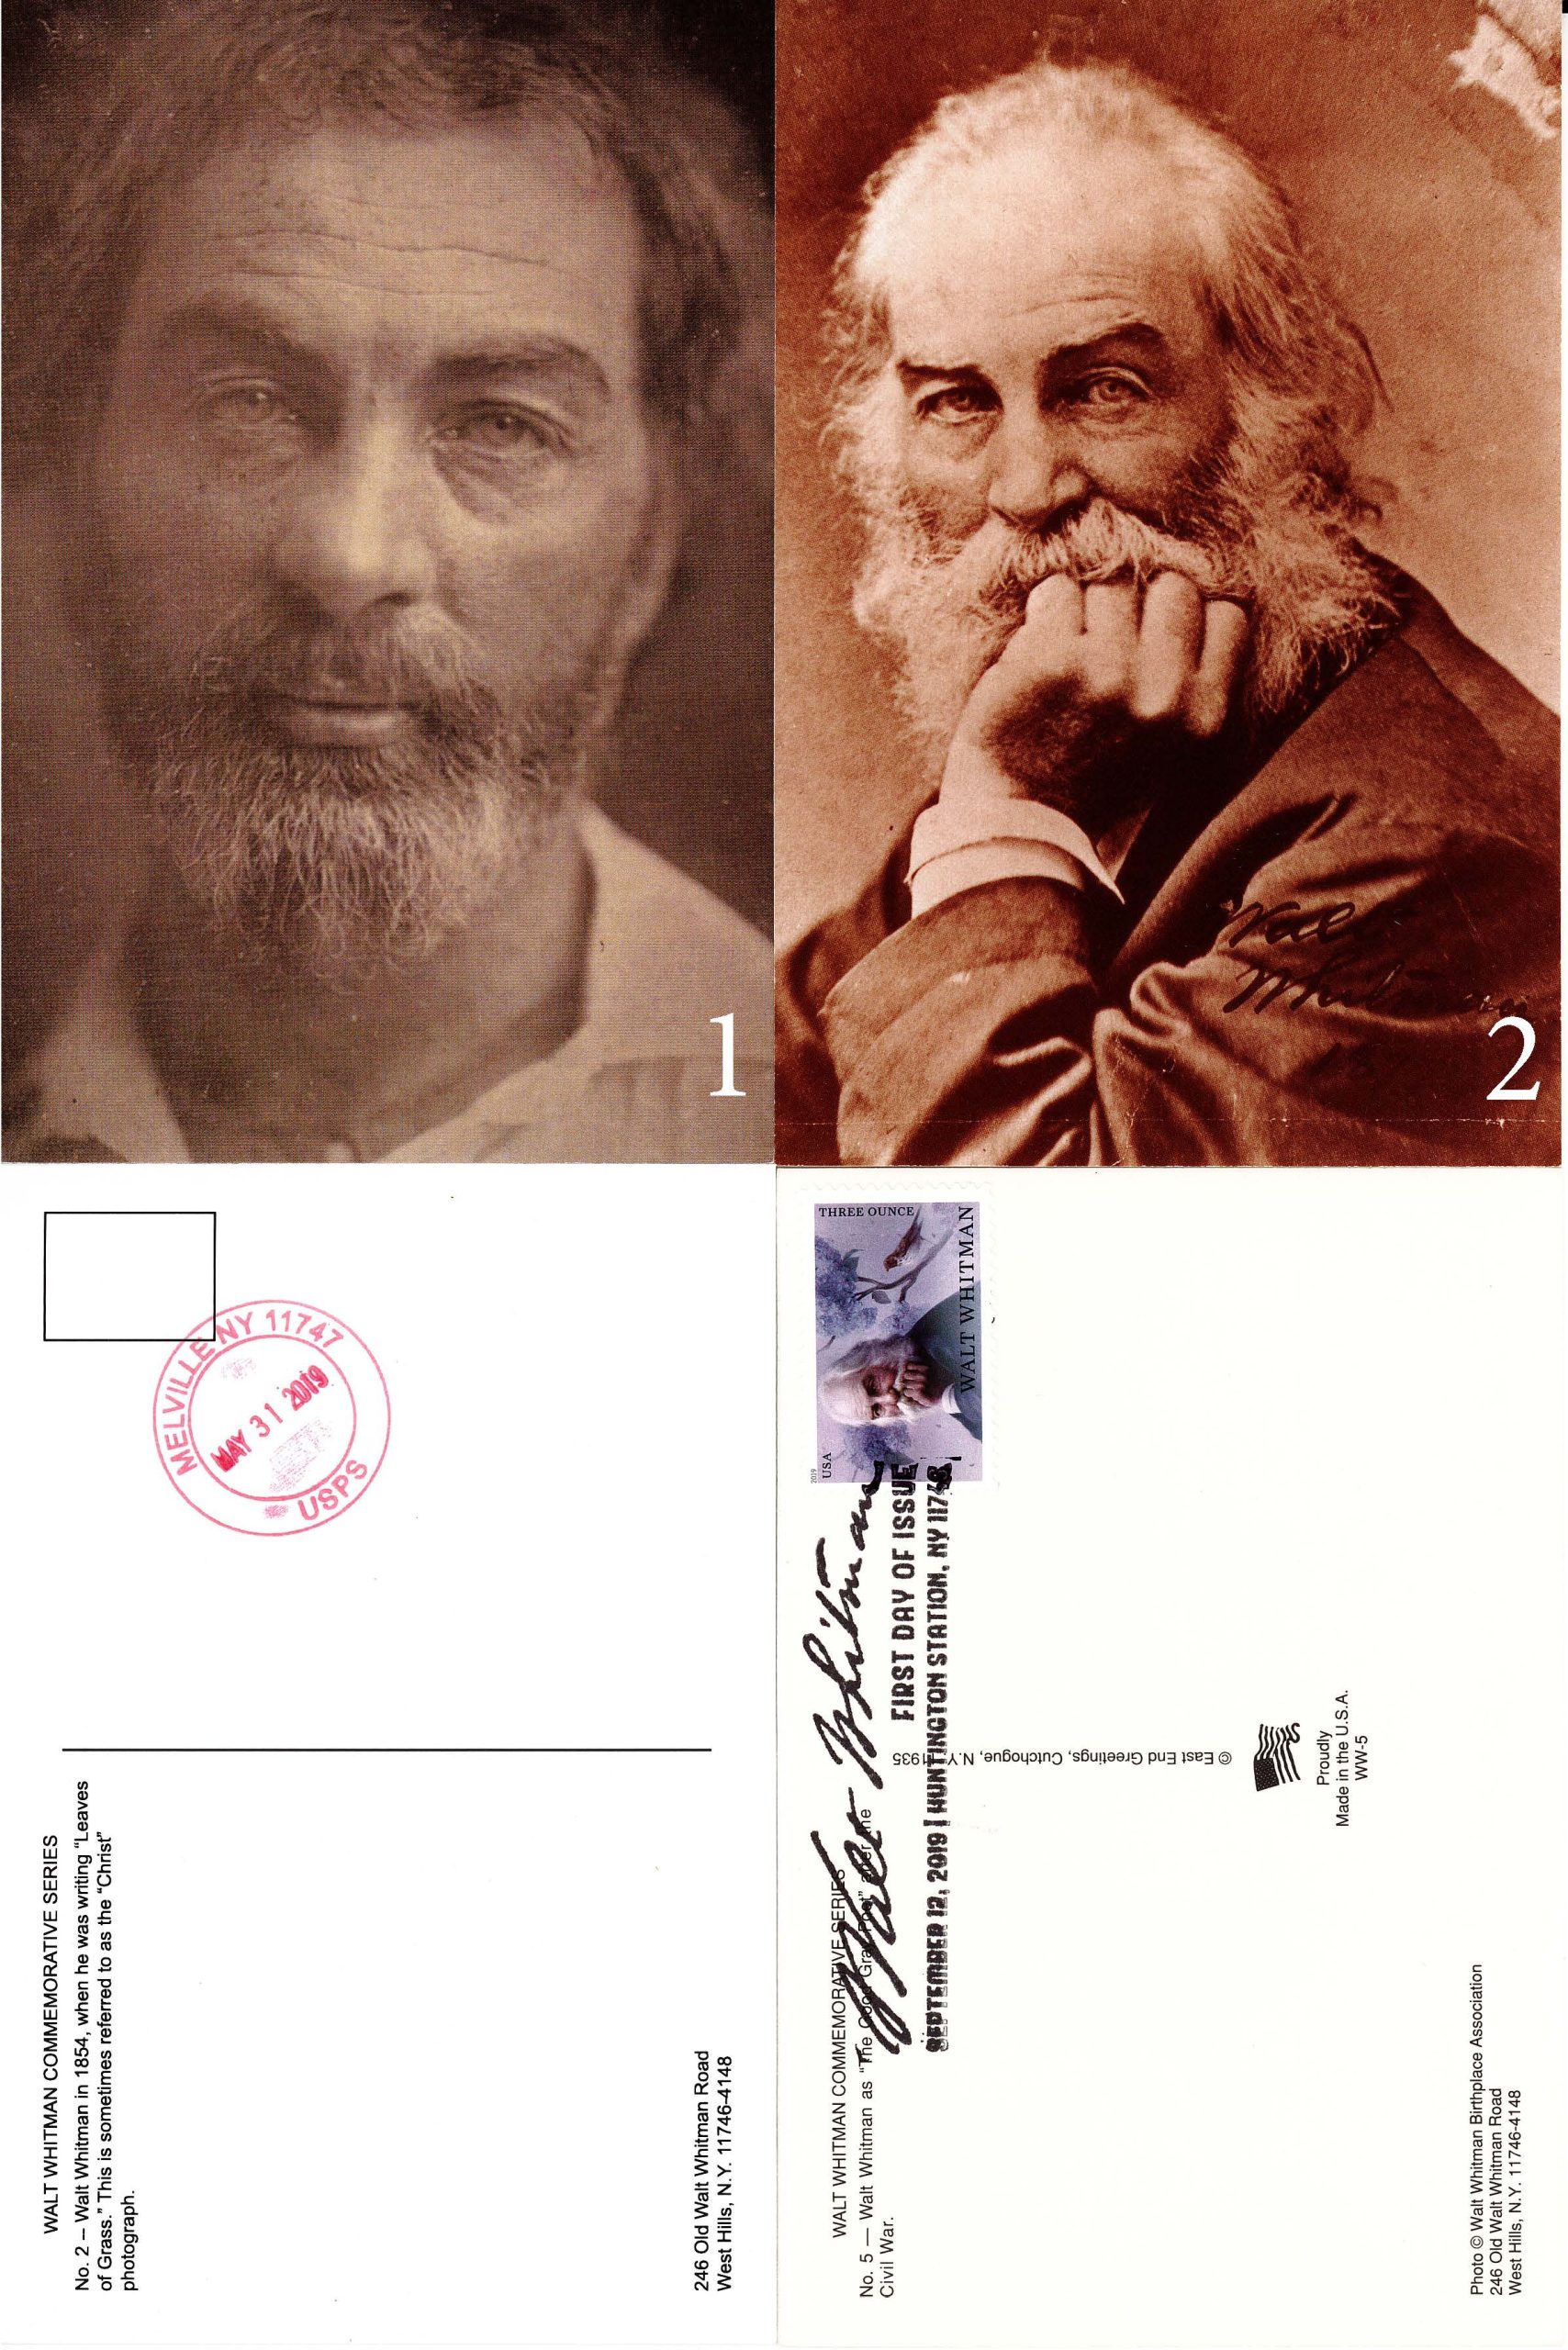 Postcard- First Day of Issue Single Stamped